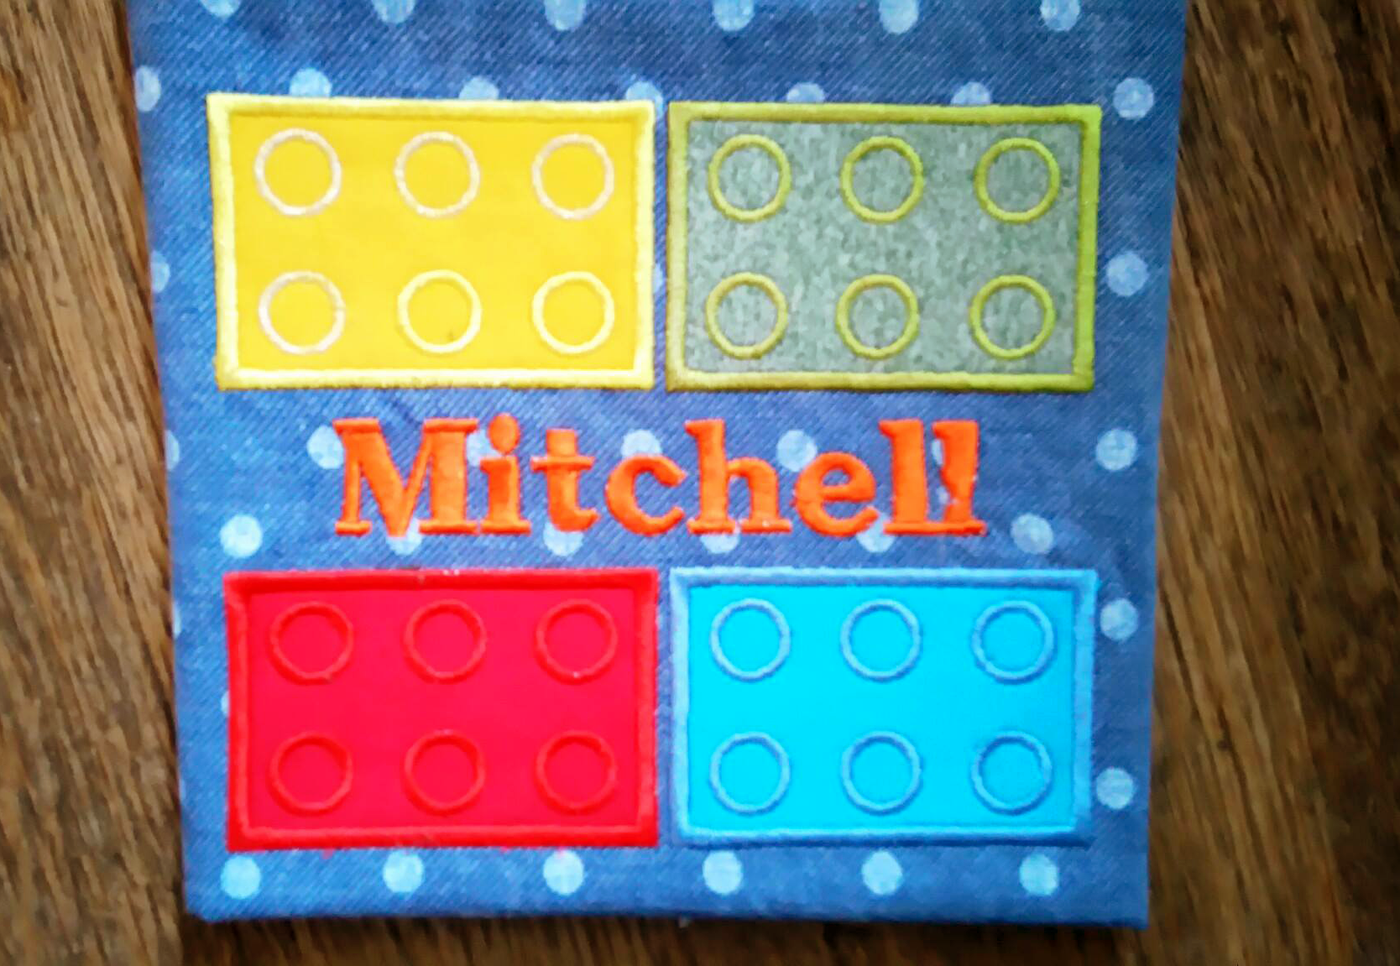 A piece of blue denim fabric with white polkadots. It has an applique design of building bricks on it with a row of bricks at the top and bottom with a split space in between. The customer has added the name "Mitchell" in the split space. (Text is not included with this design.)